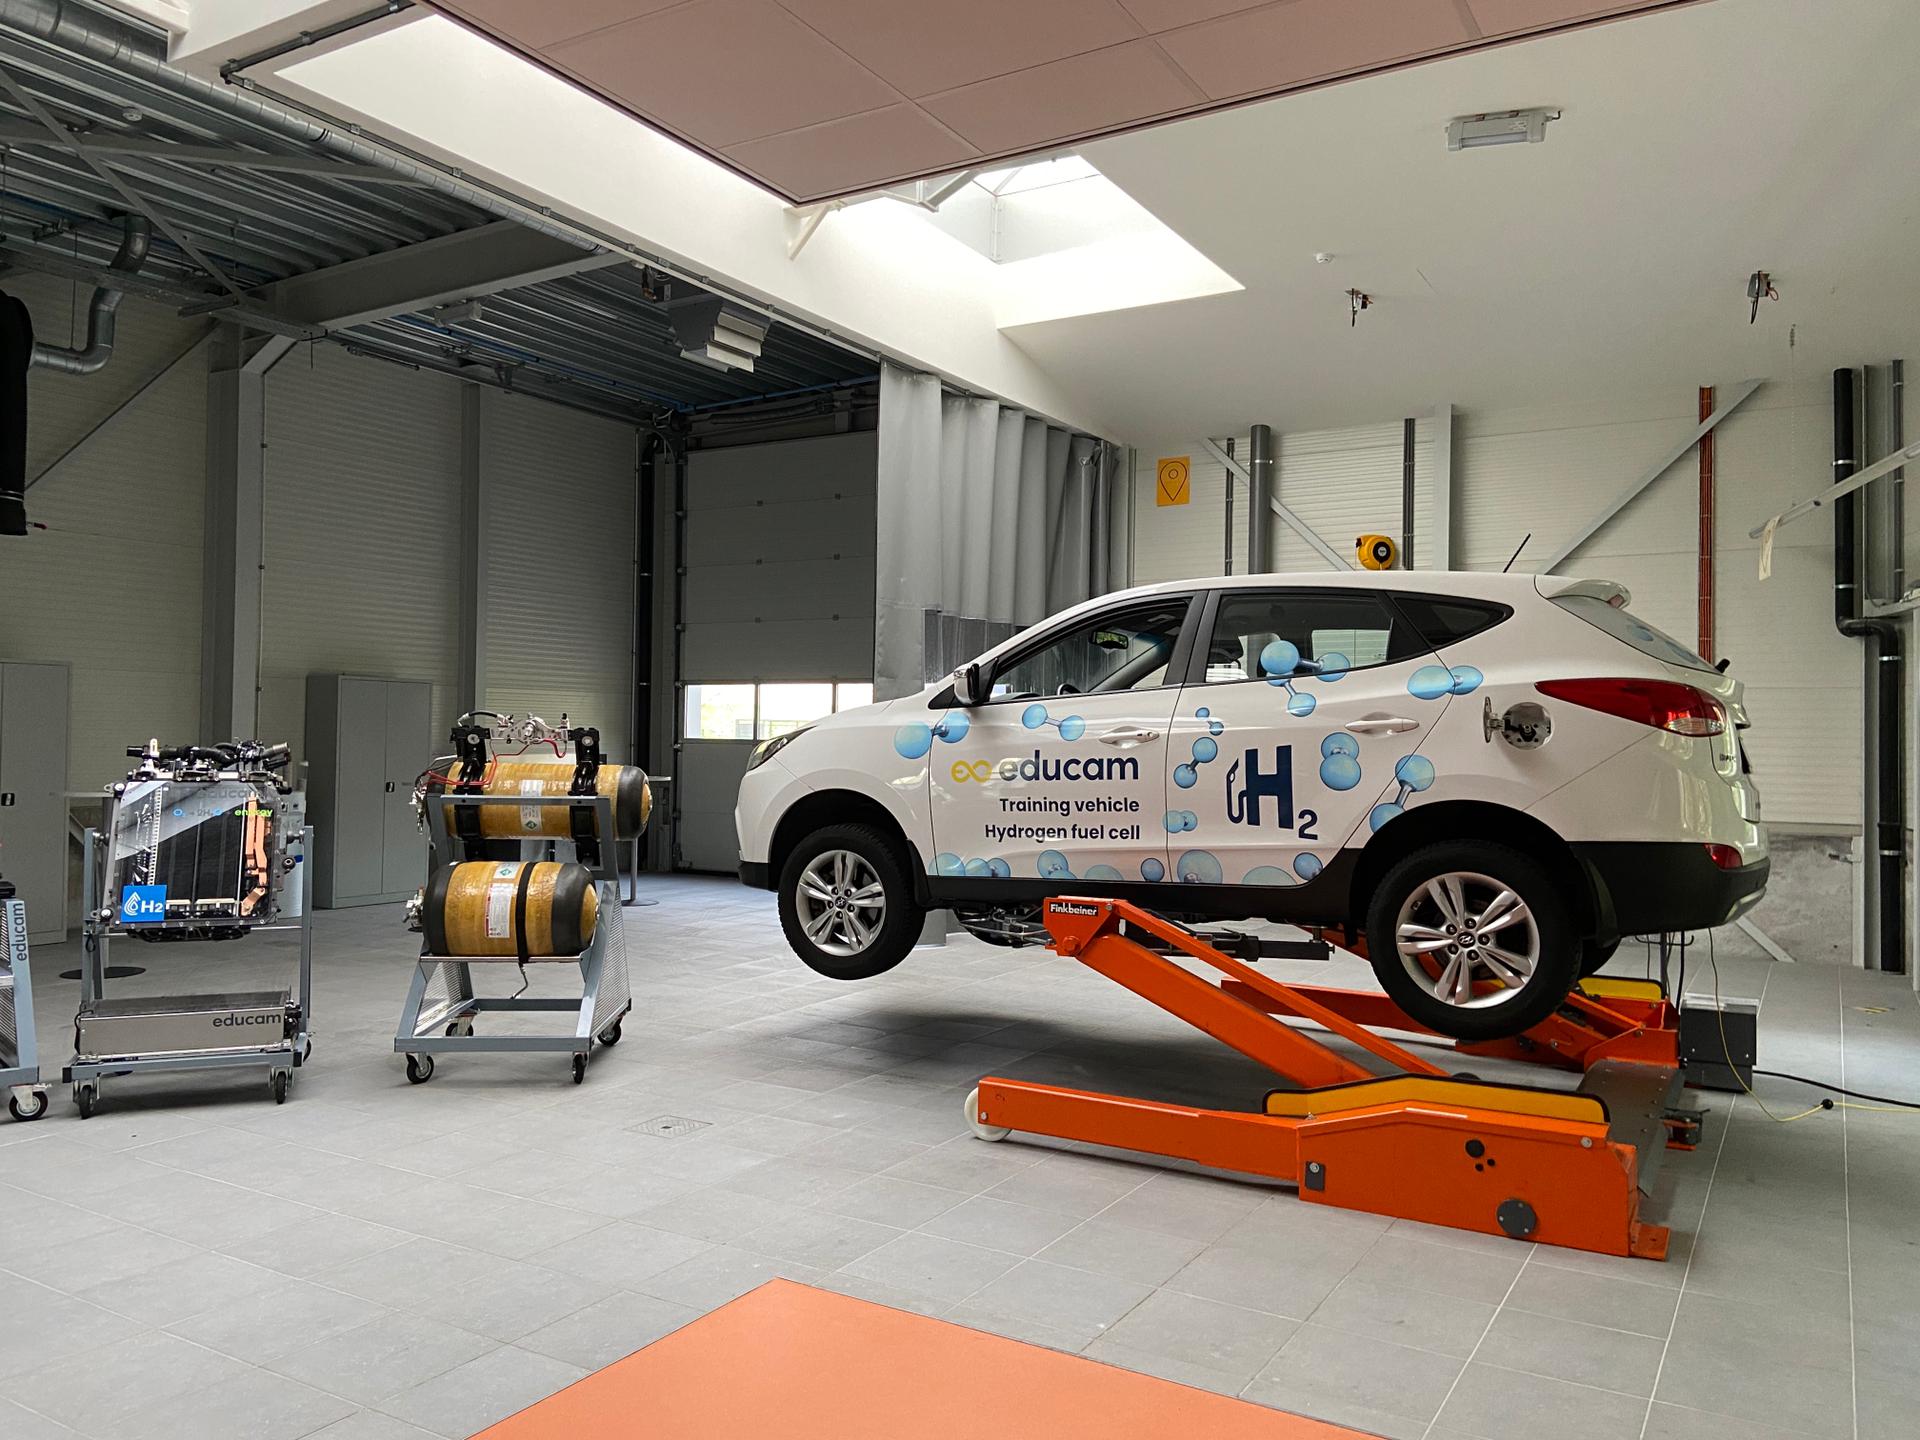 Training facility for hydrogen garages opens in Belgium